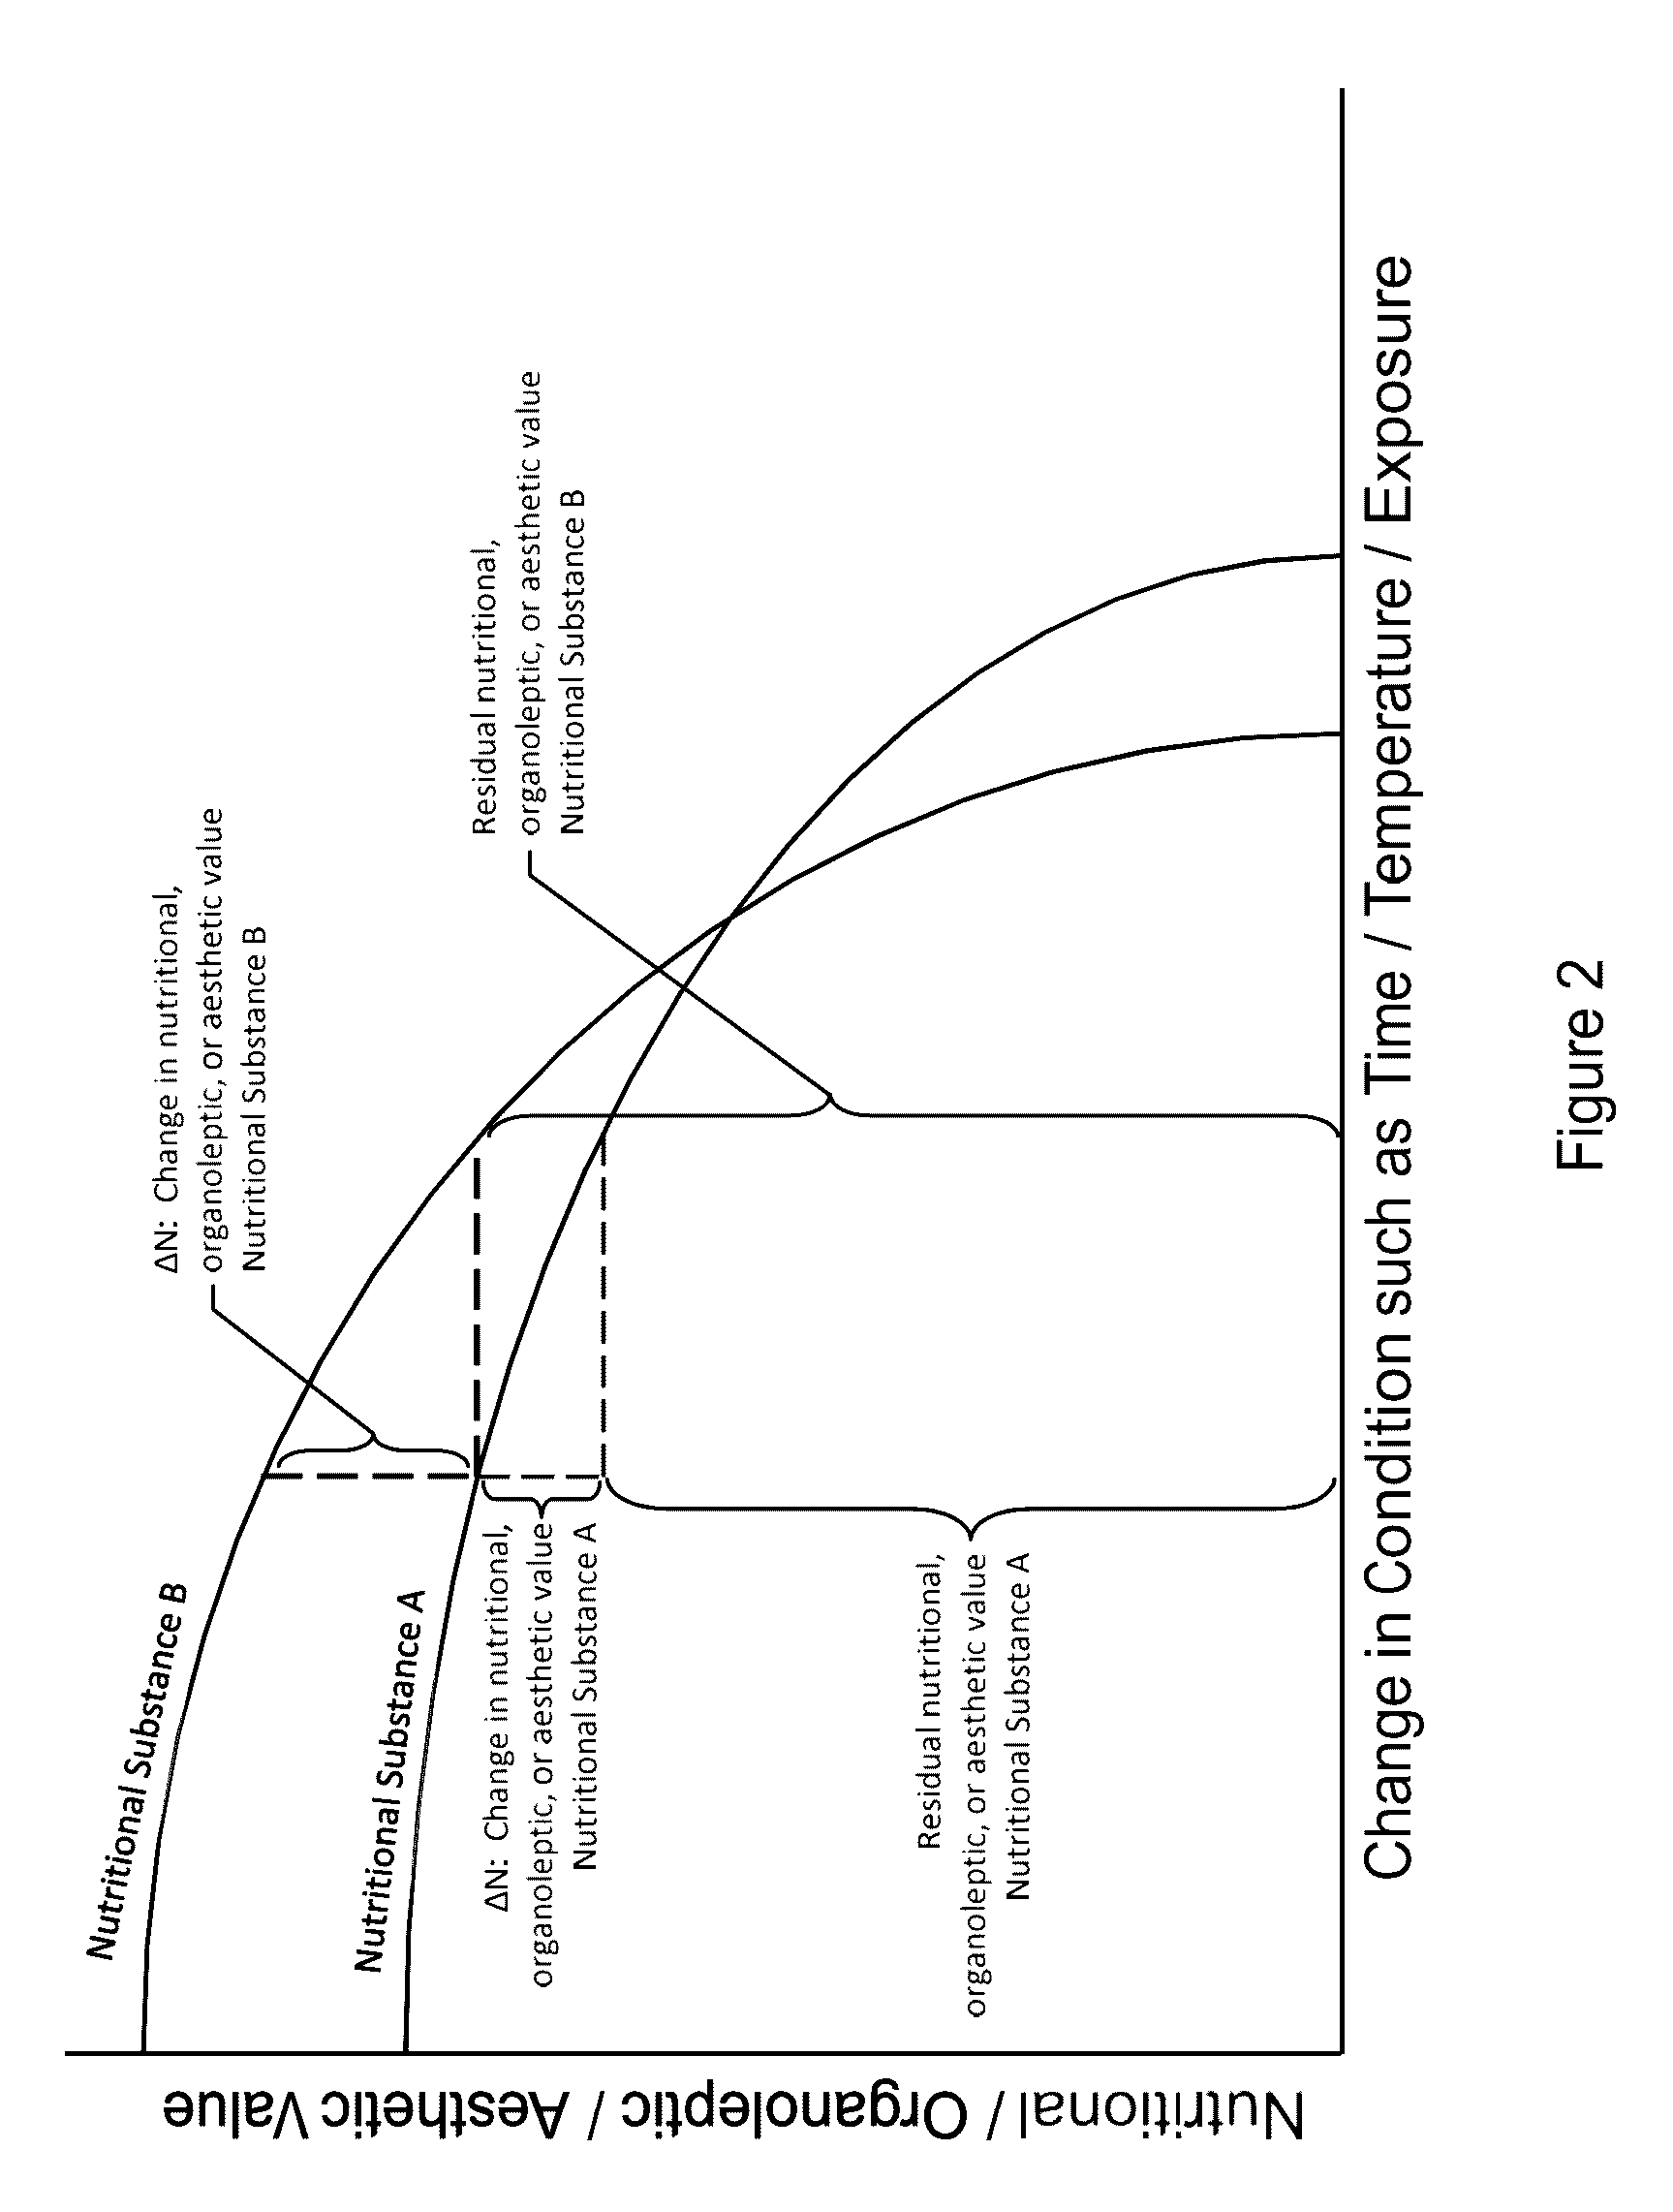 Conditioner with weight sensors for nutritional substances